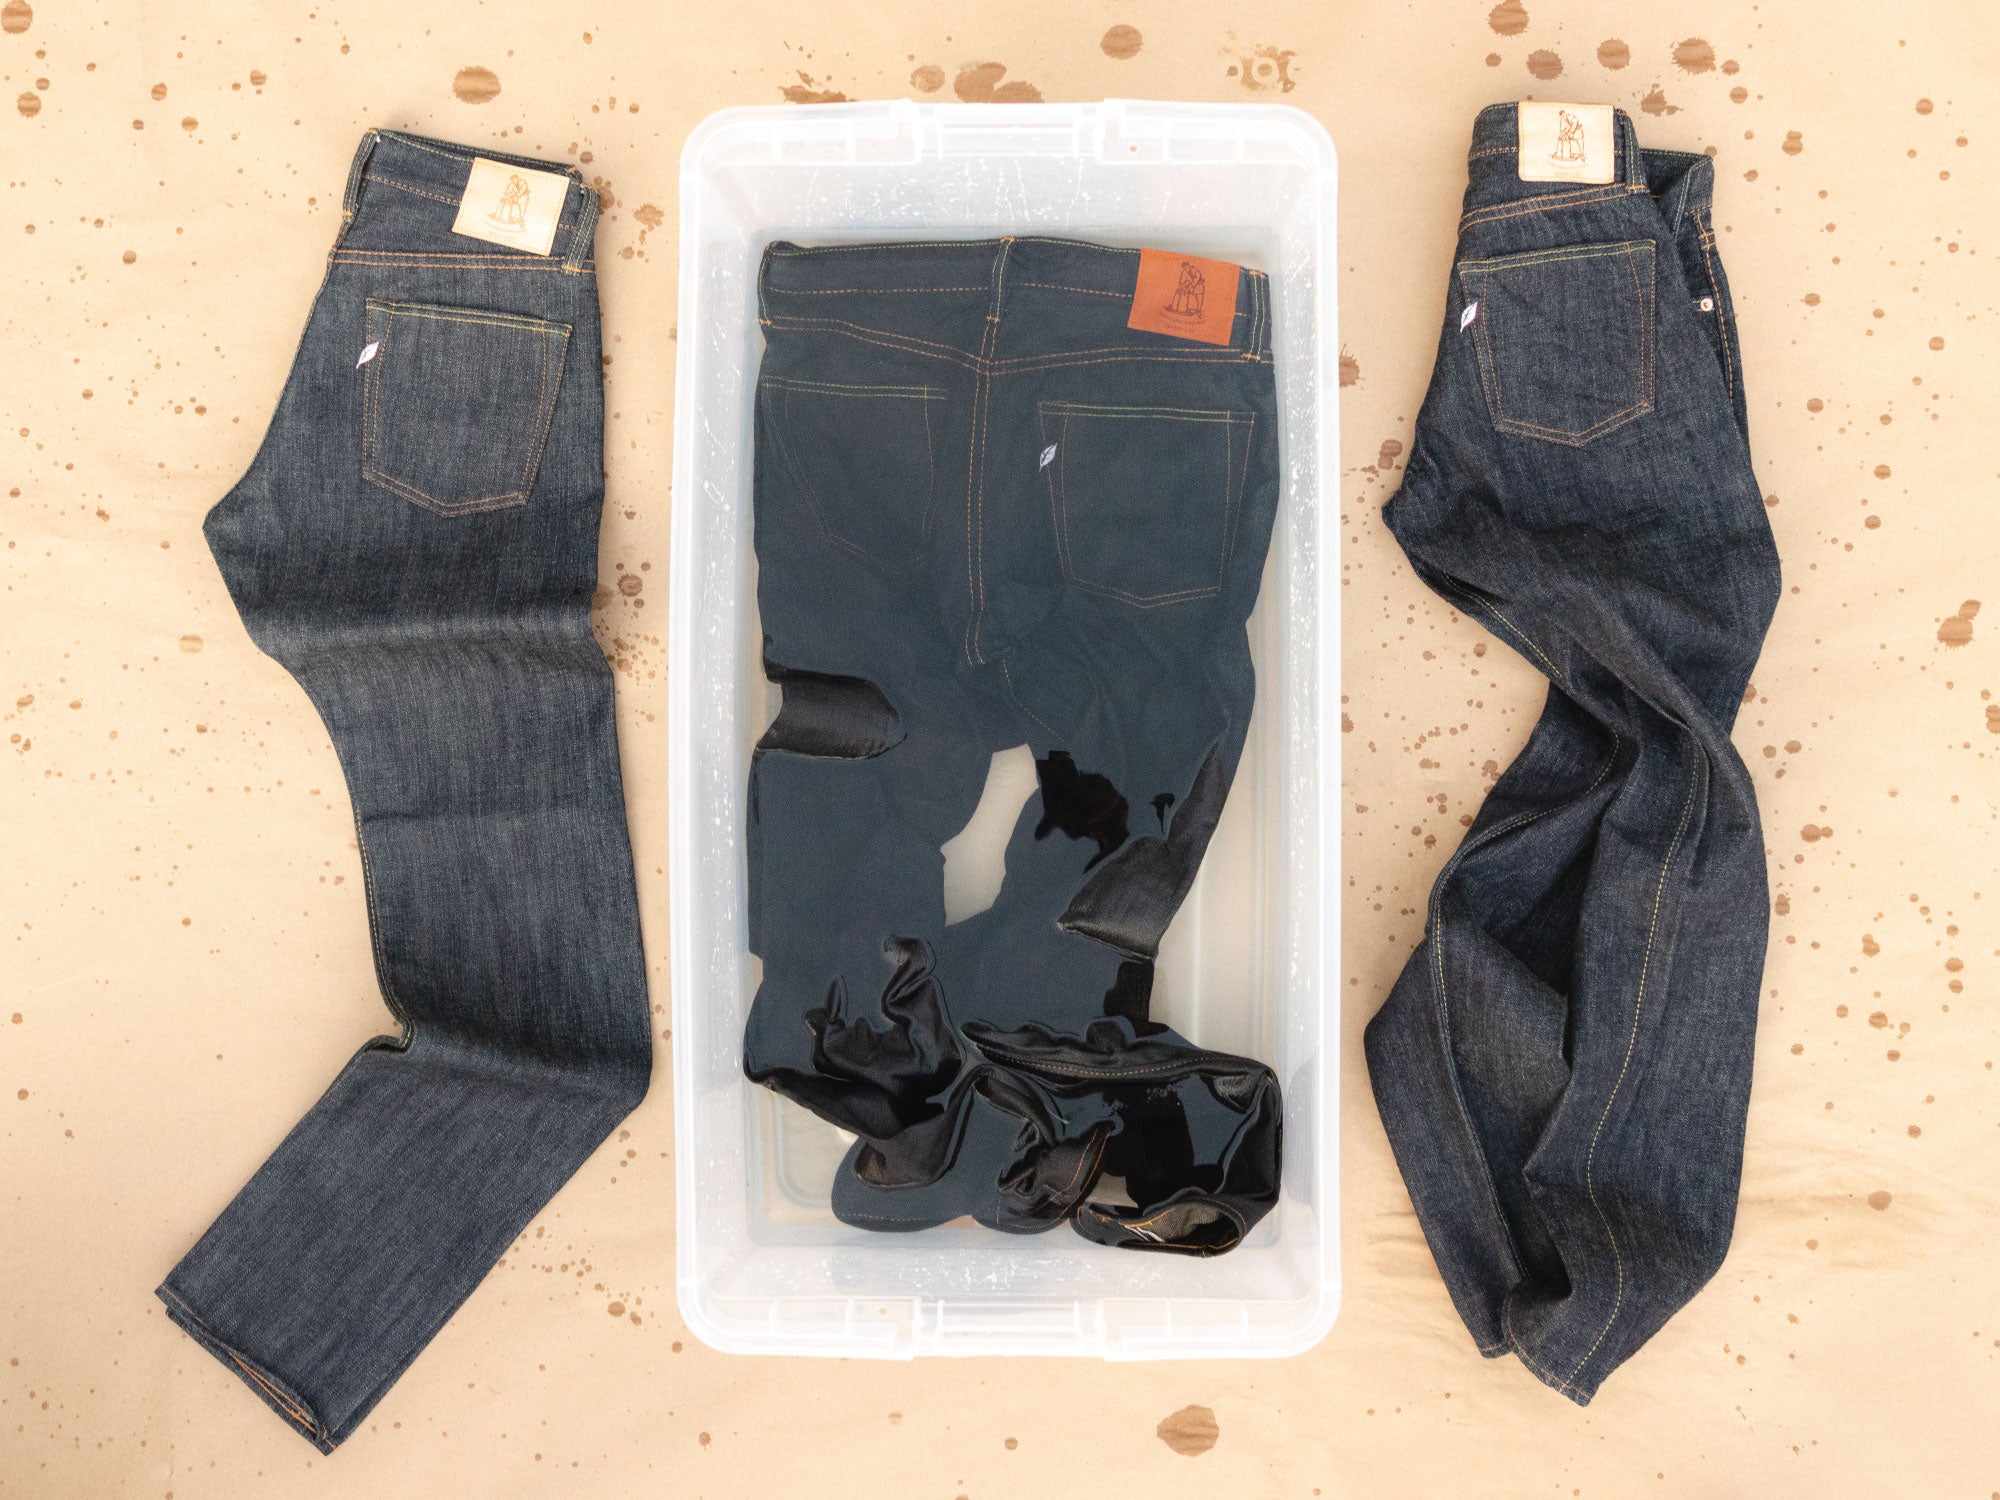 unsanforized denim before and after